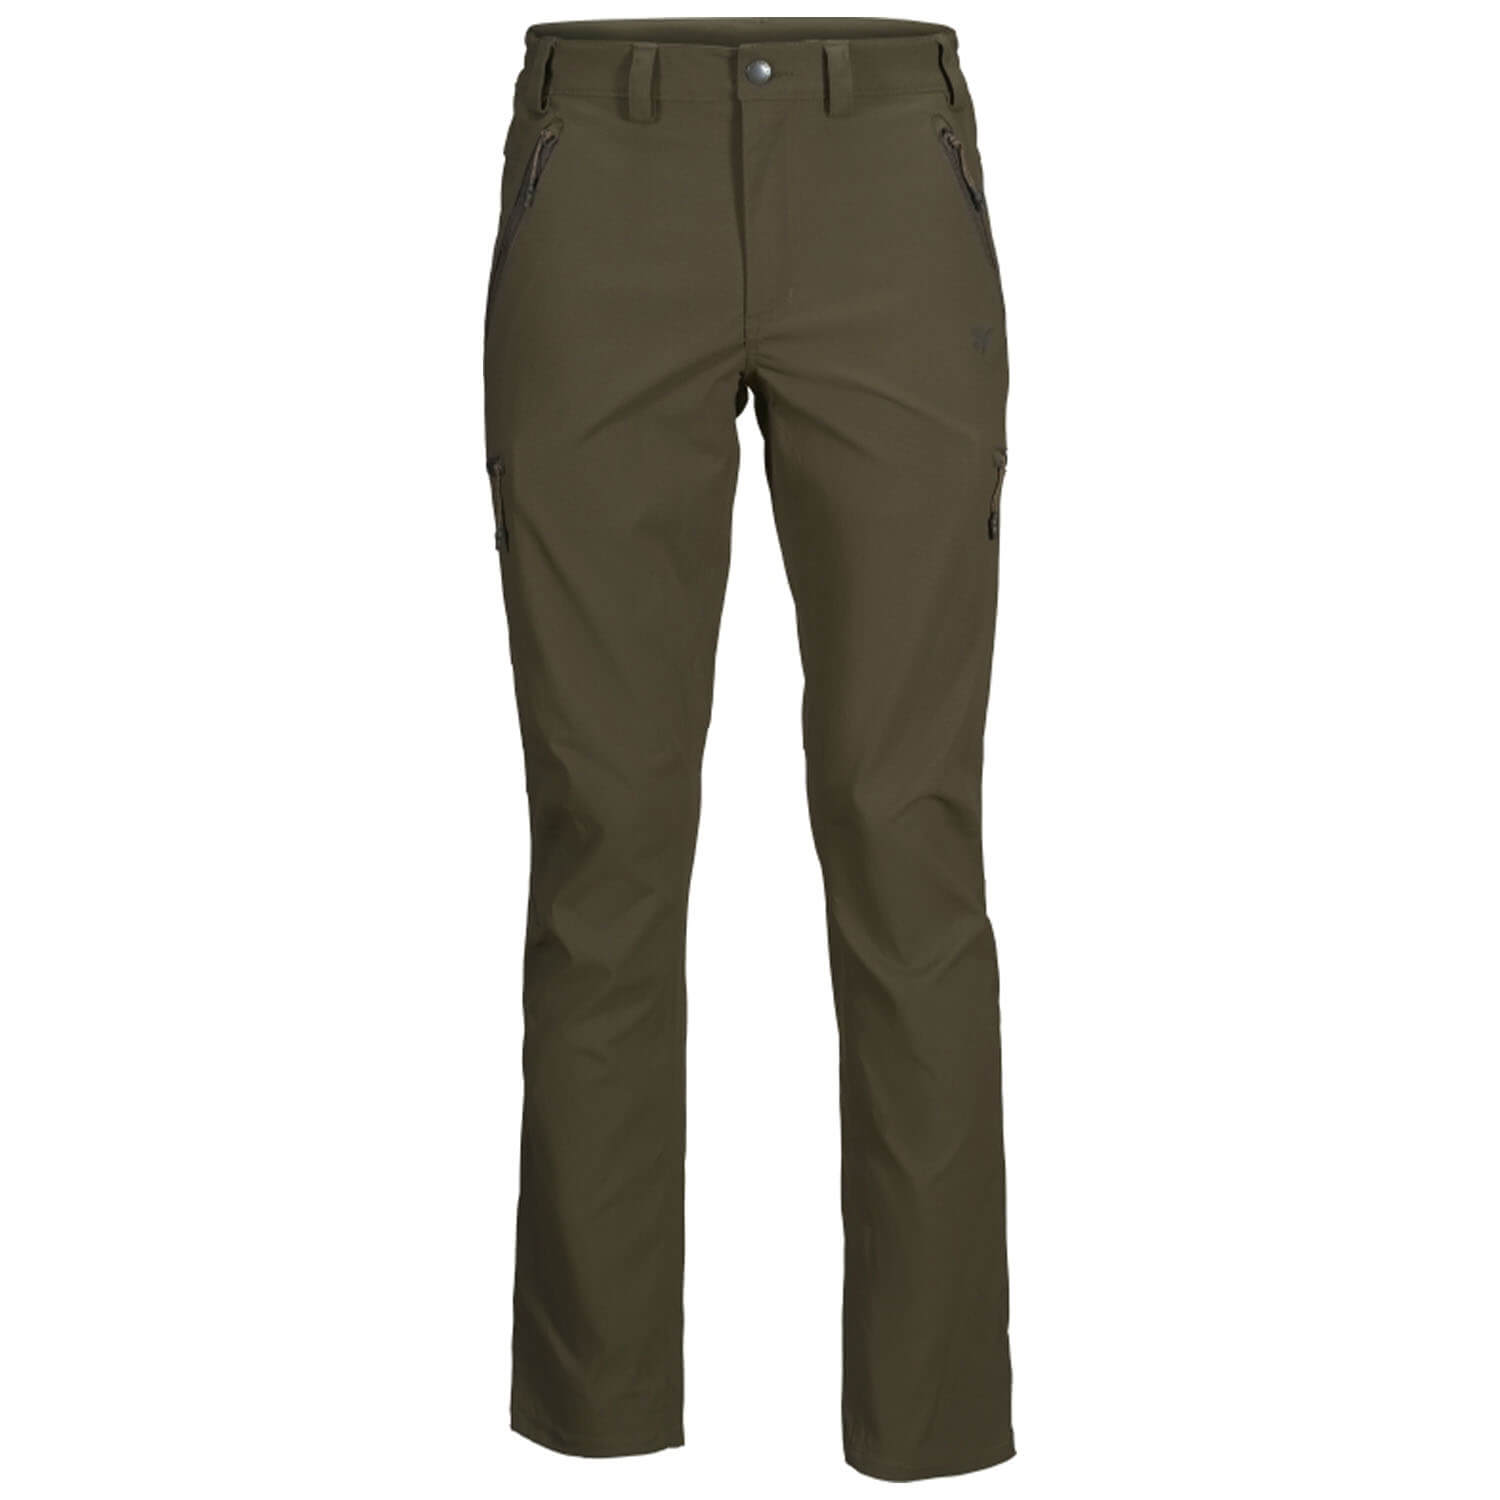 Seeland hunting pants outdoor stretch (pine green)